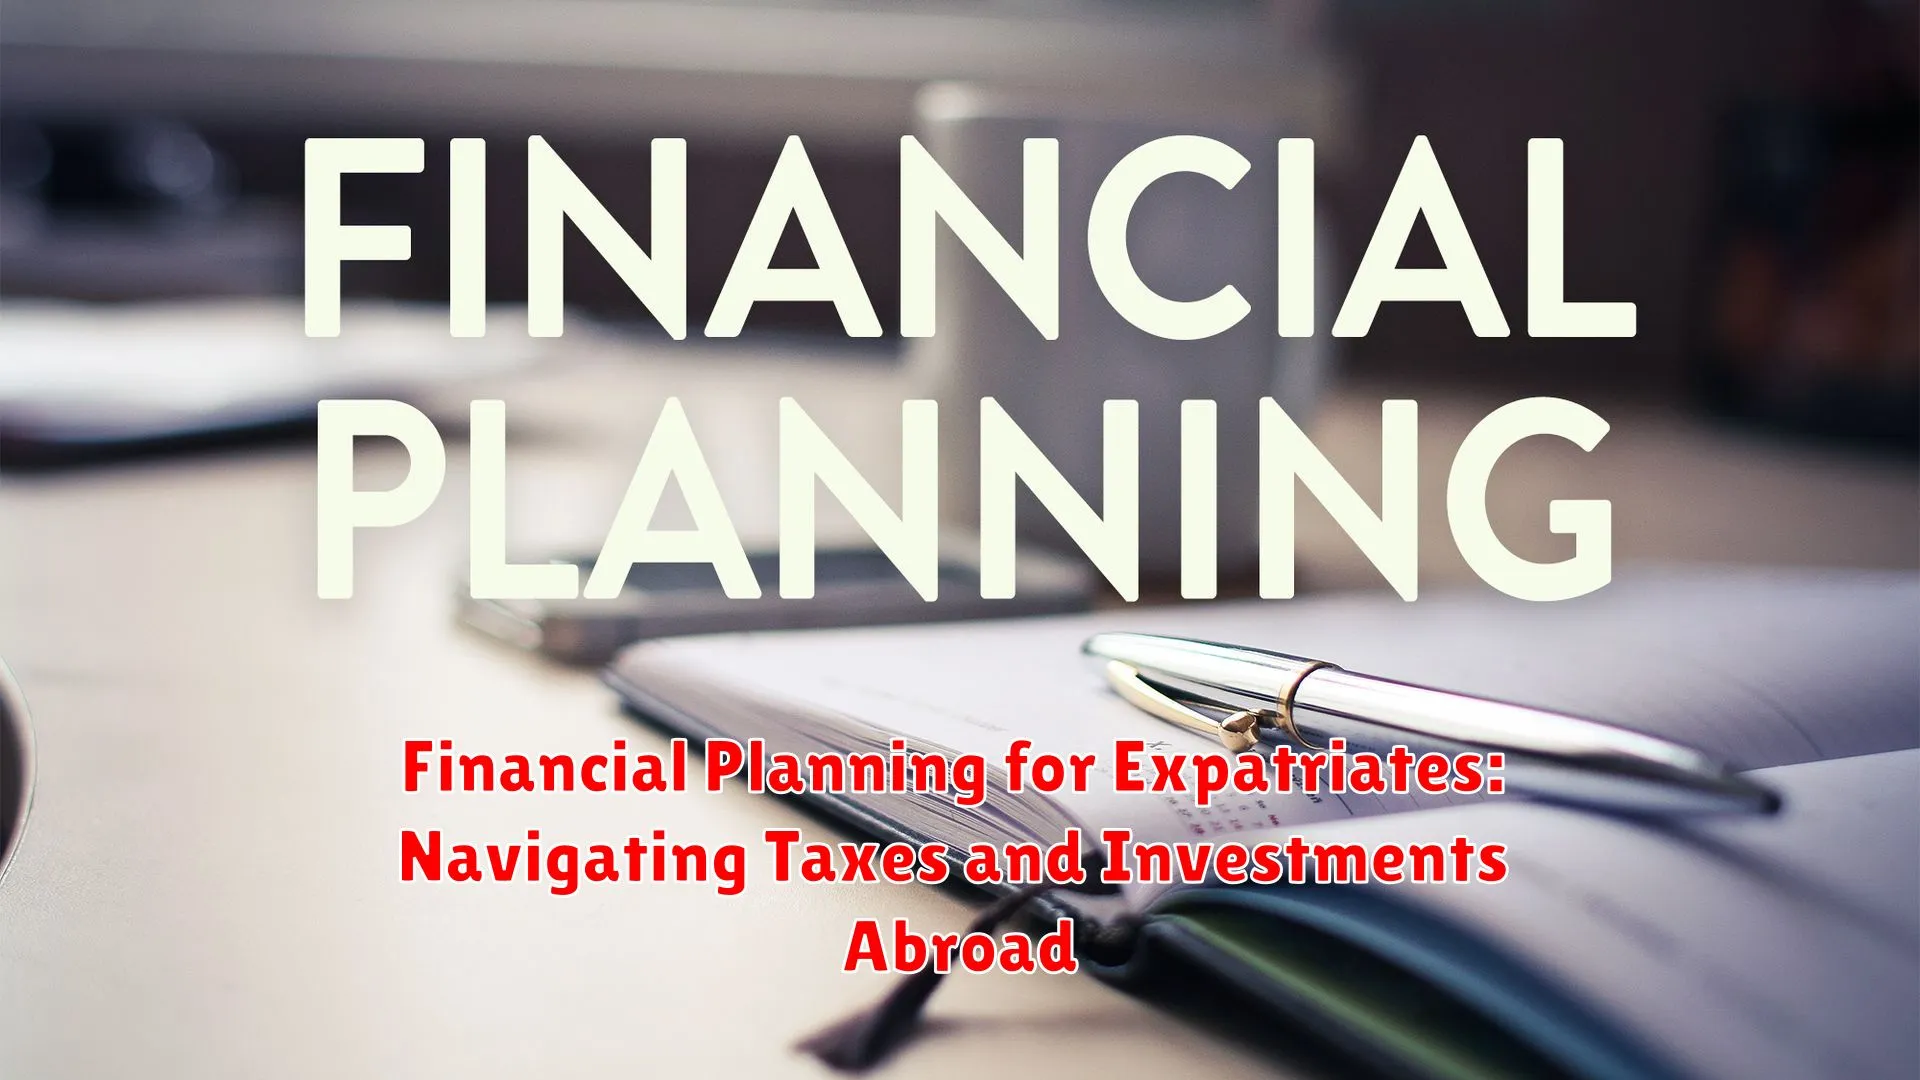 Financial Planning for Expatriates: Navigating Taxes and Investments Abroad